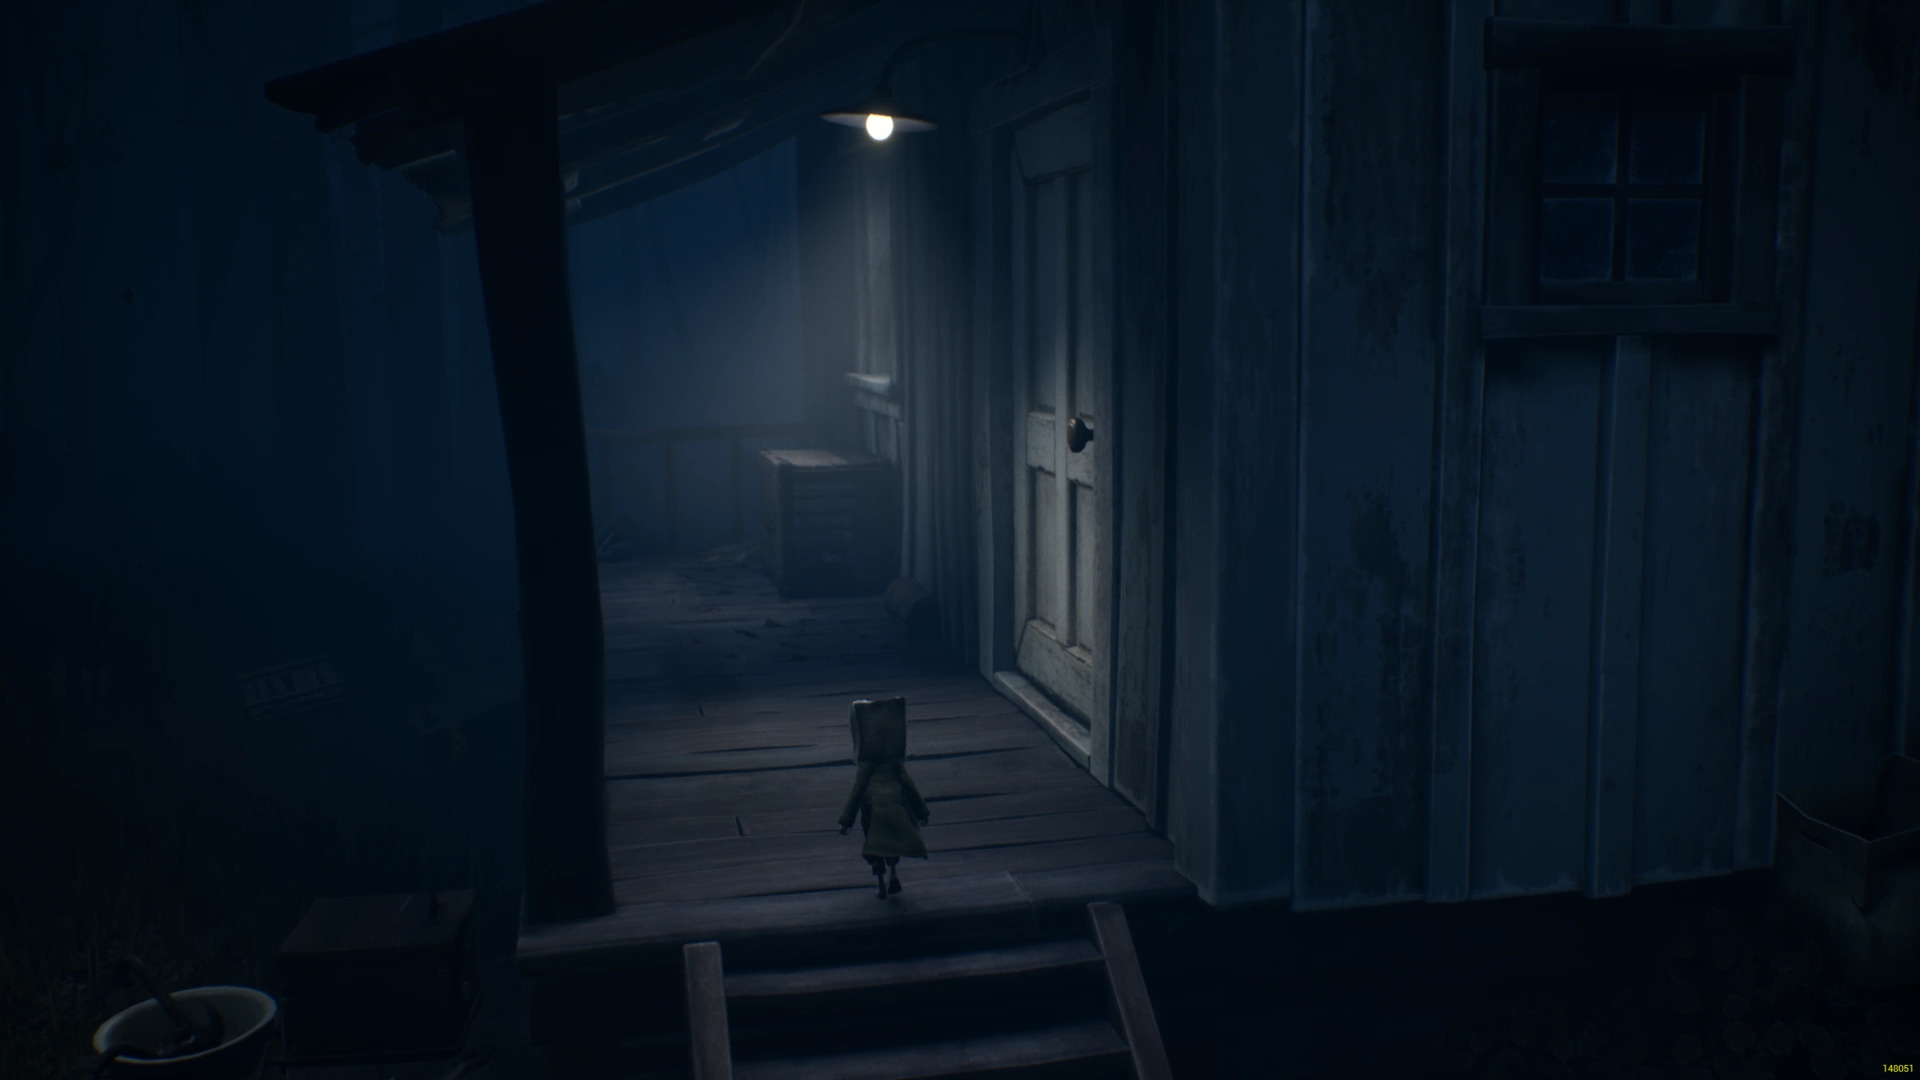 Little Nightmares 2 review: A horrifying sequel that sometimes